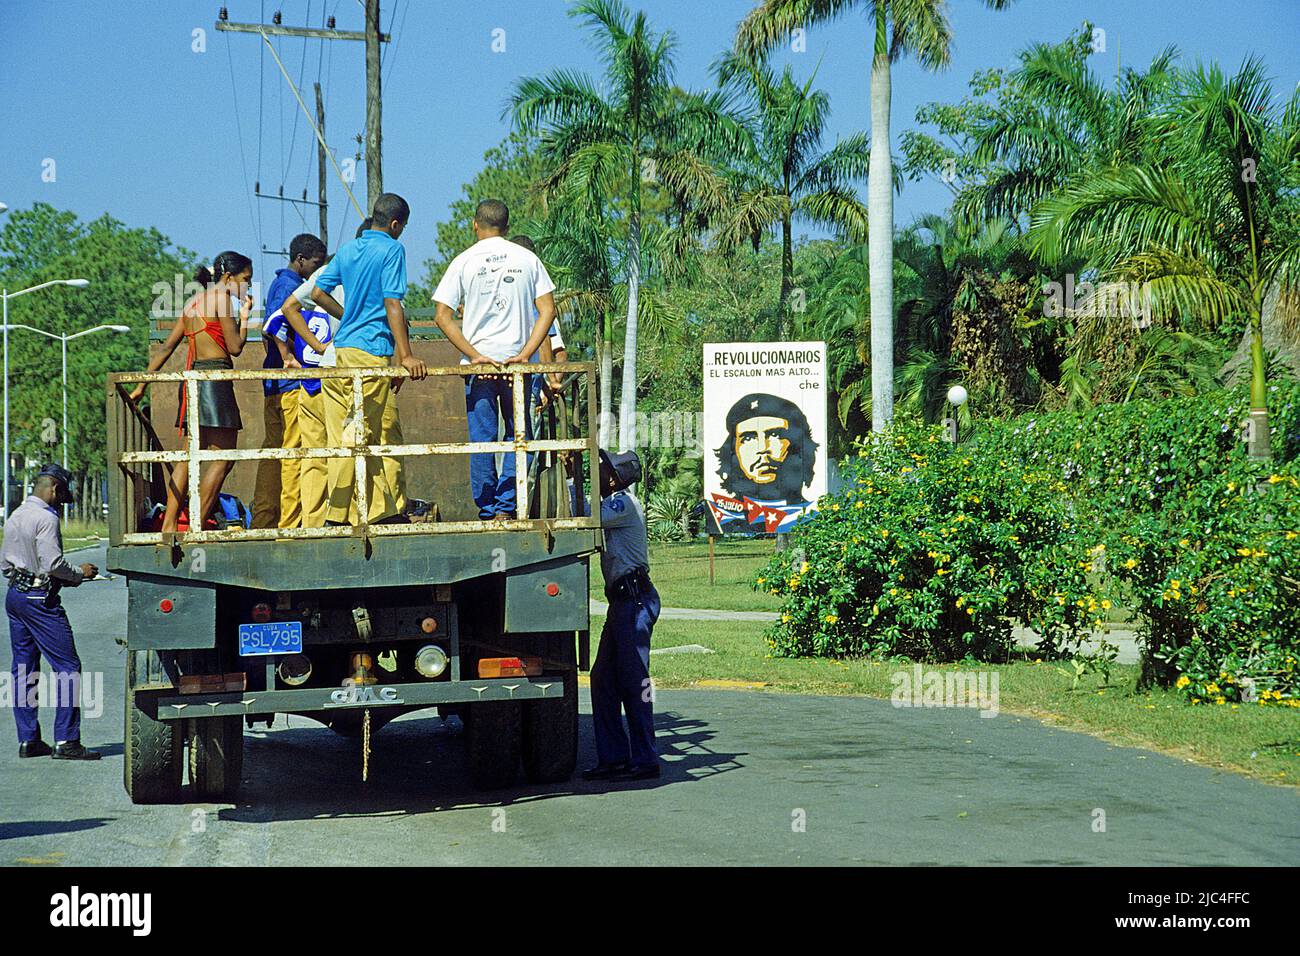 Traffic control, police controls cuban people on a truck, beside a  poster of Che Guevara, Pinar del Rio, Cuba, Caribbean Stock Photo